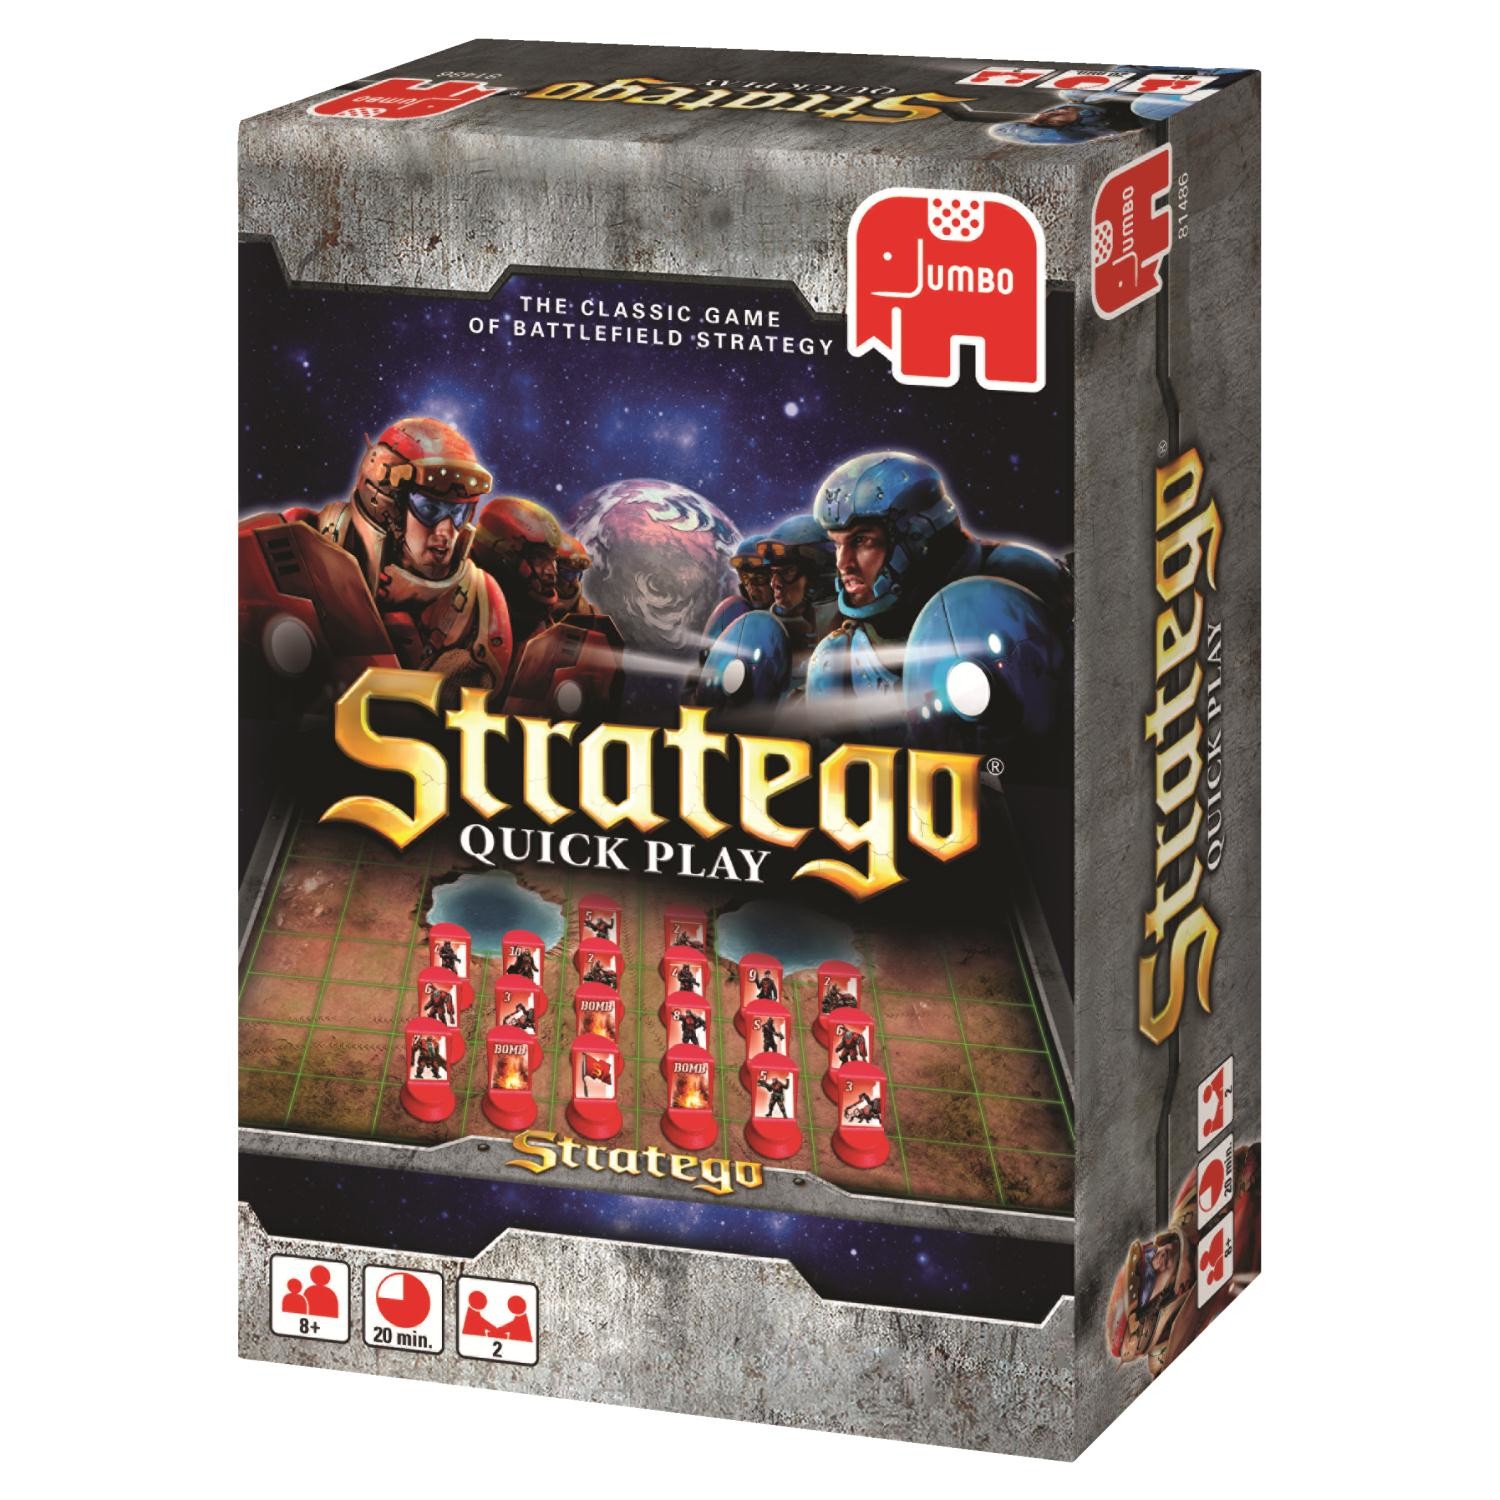 Stratego Quick play